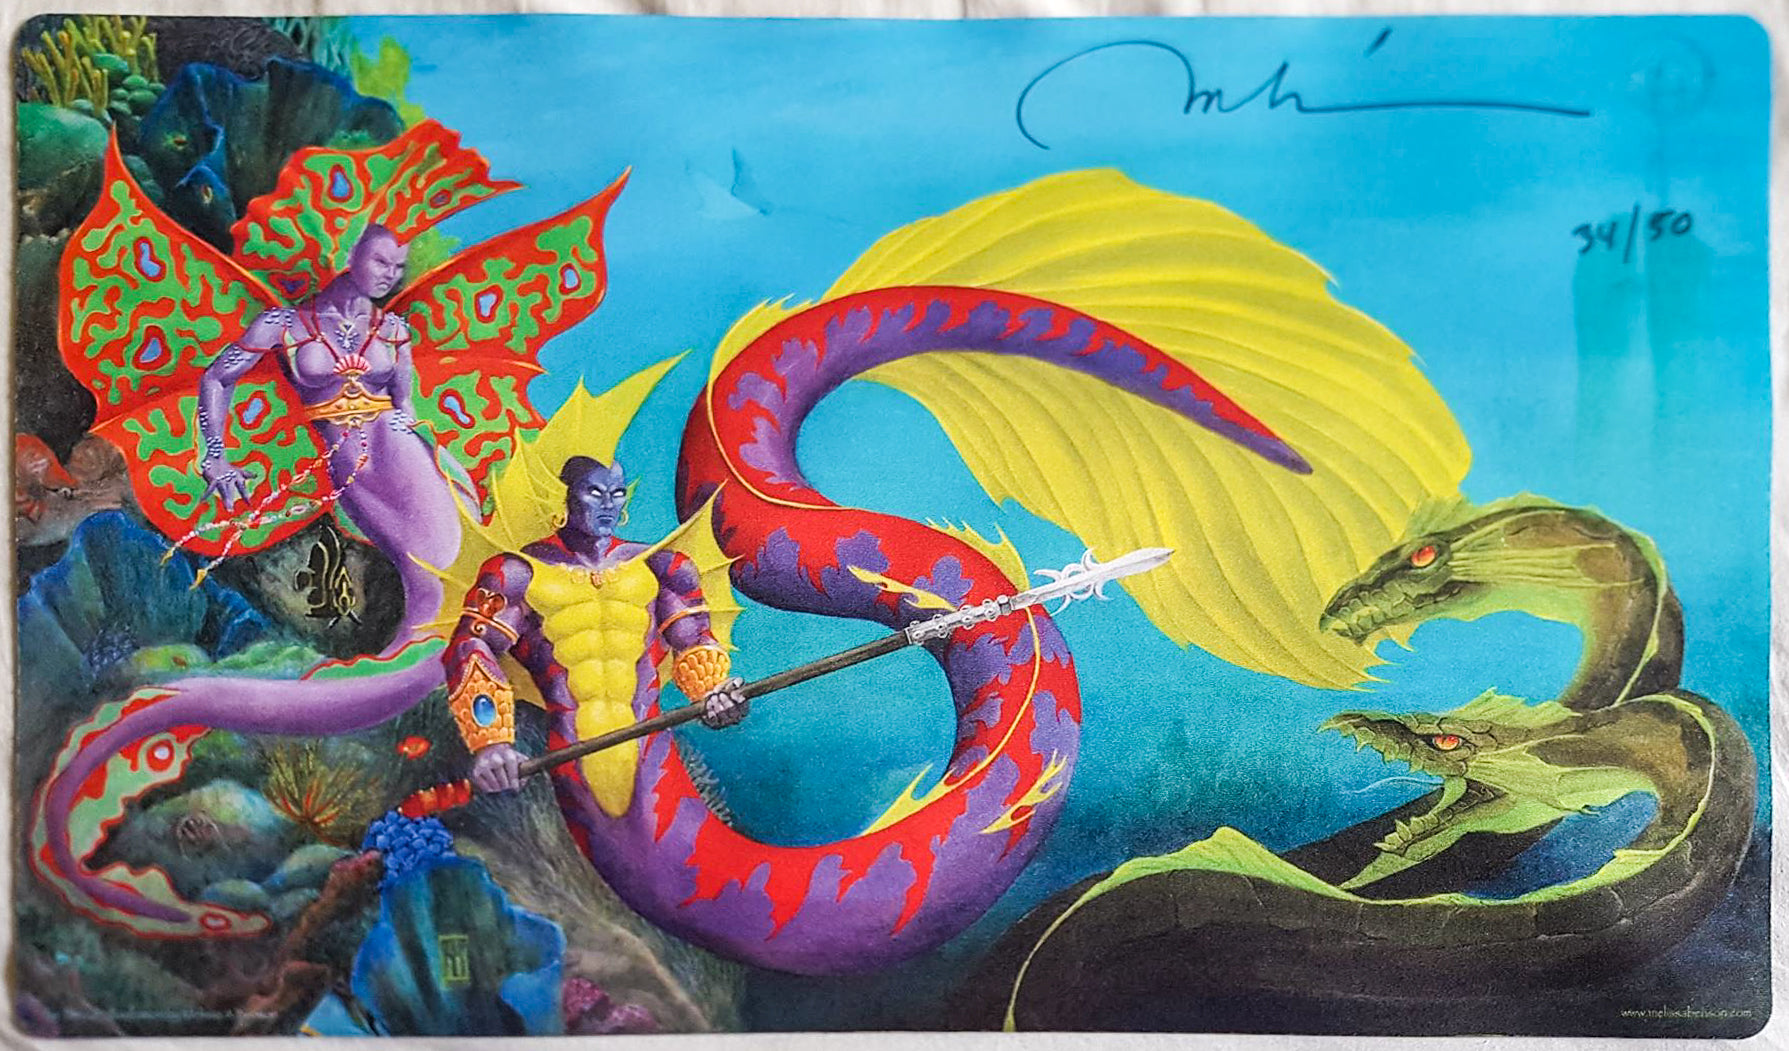 The Threat (Lord of Atlantis) - Melissa A. Benson - Signed by the Artist - Limited Edition - MTG Playmat